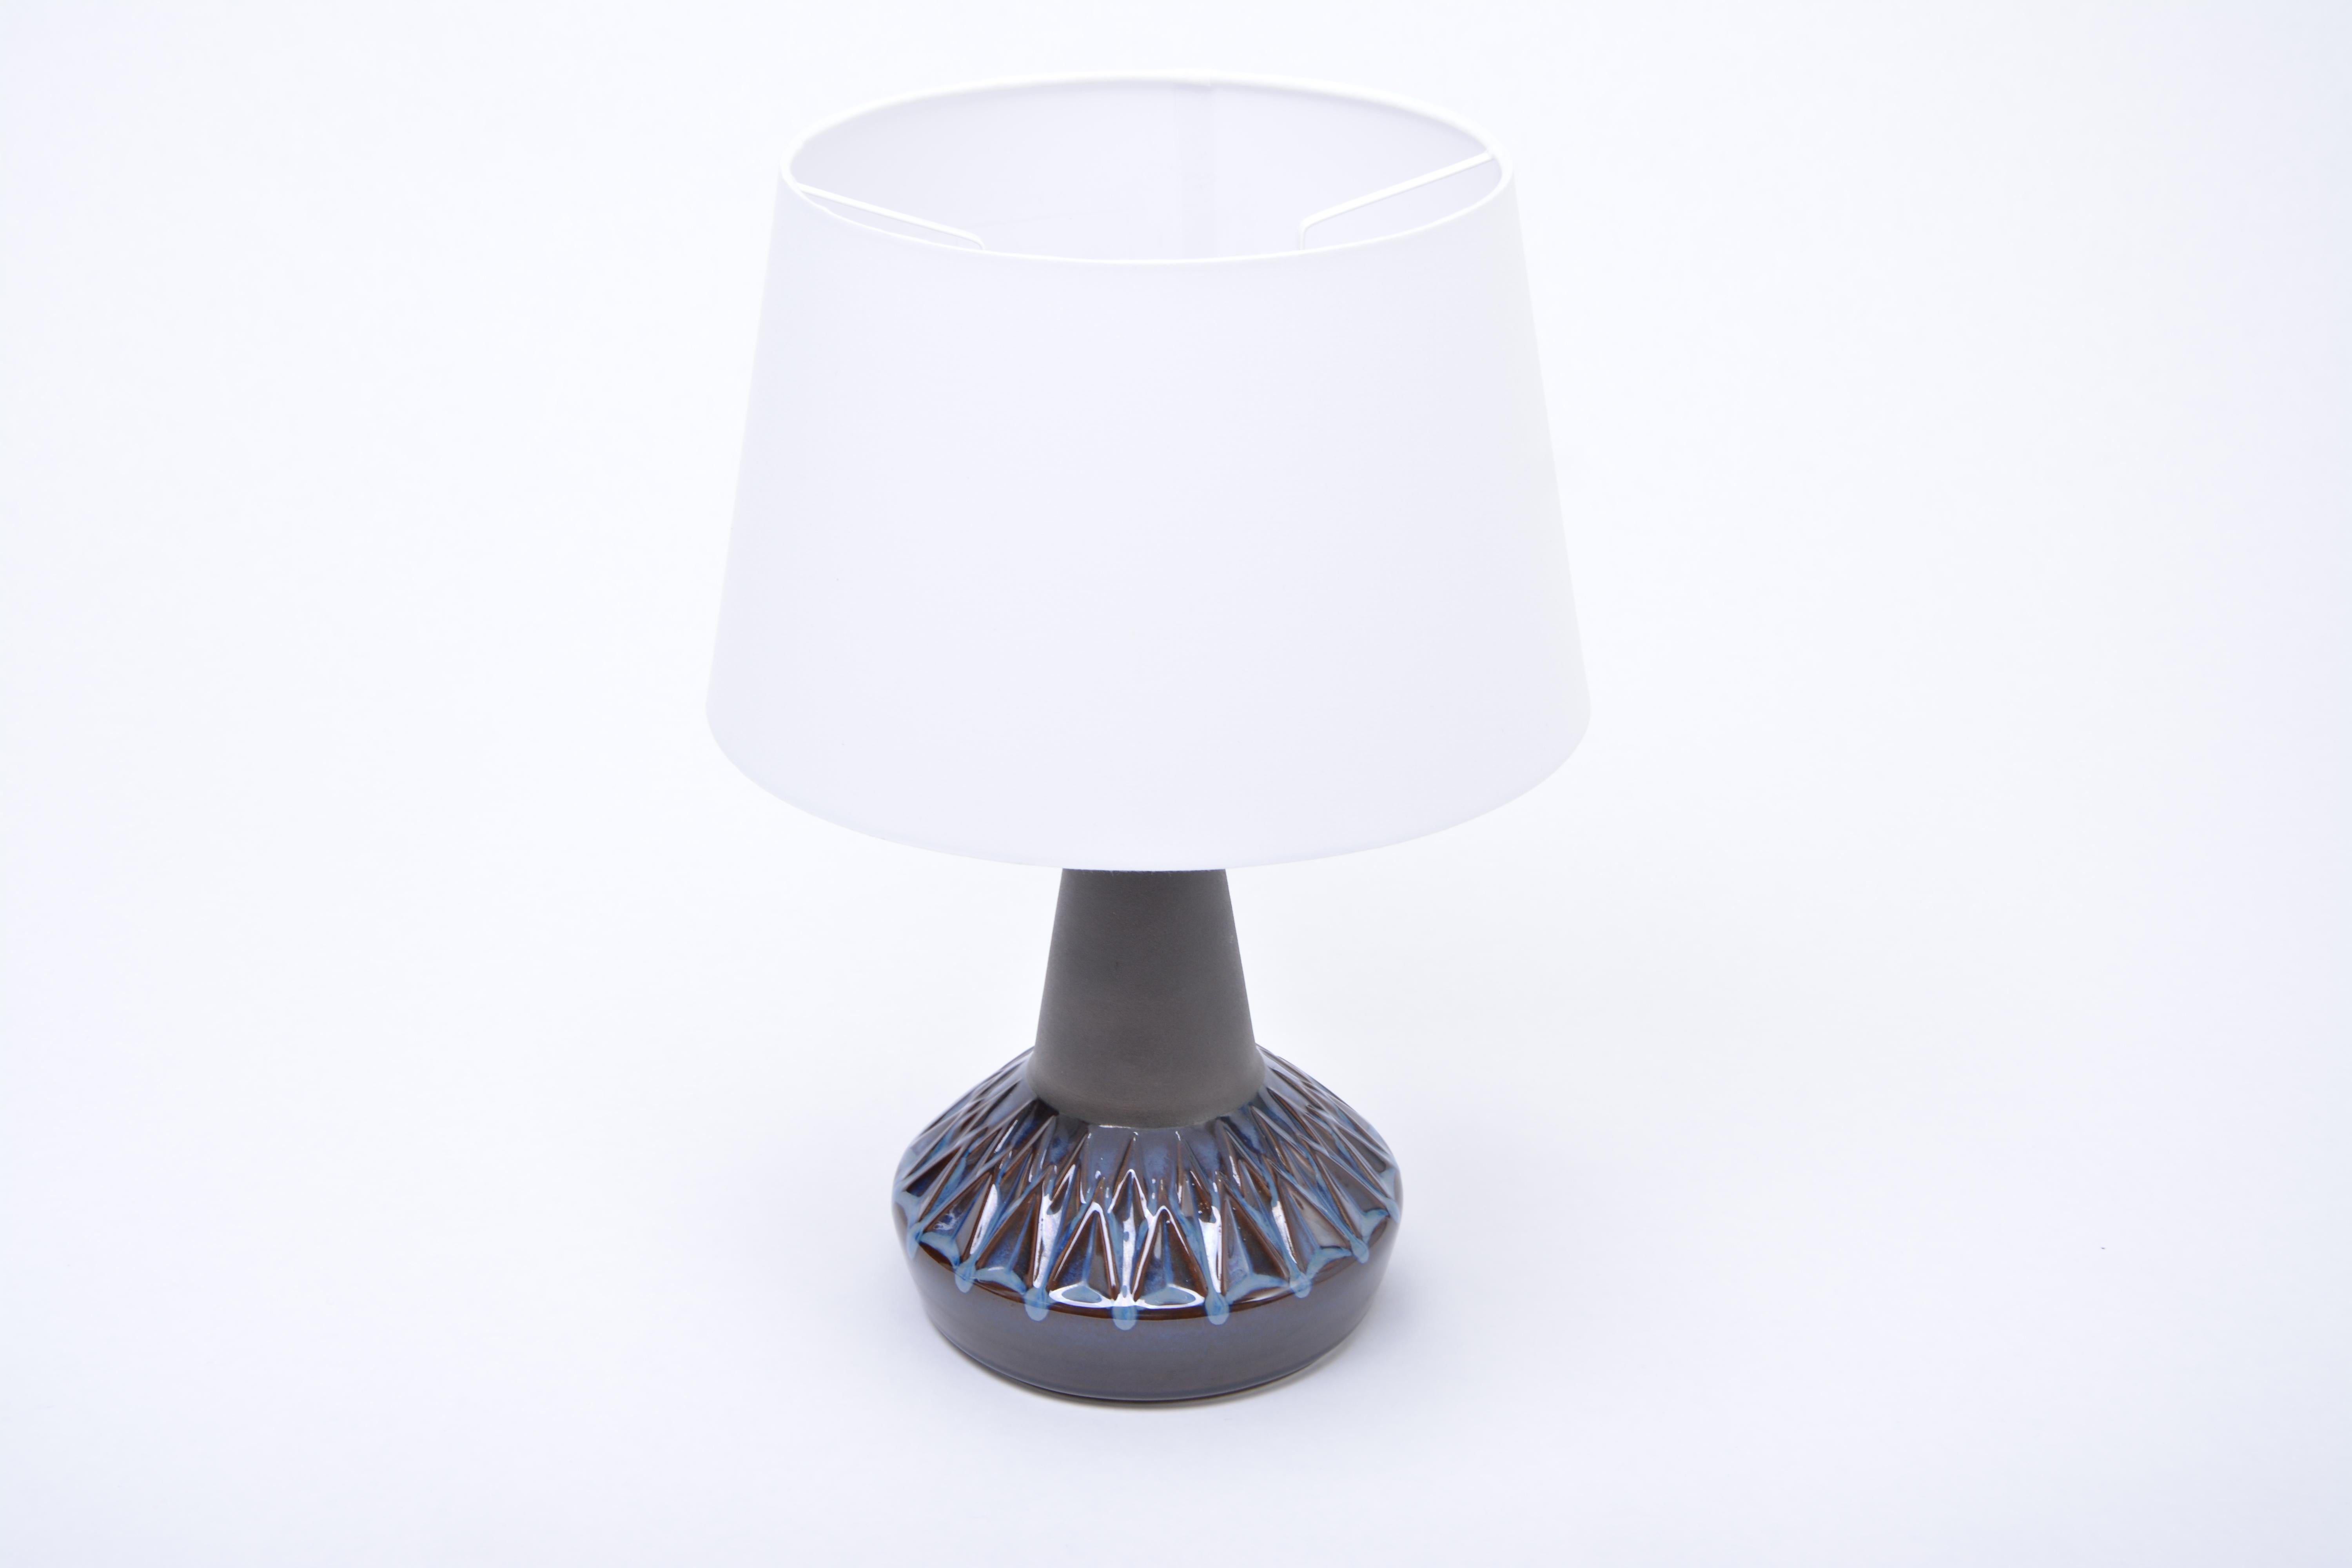 Mid-Century Modern table lamp model 1058 by Soholm

Stoneware table lamp with geometric pattern to its base produced in Denmark by Soholm. Beautiful ceramic glazing in tones of blue. The lamp has been rewired for European use and has a new shade. To